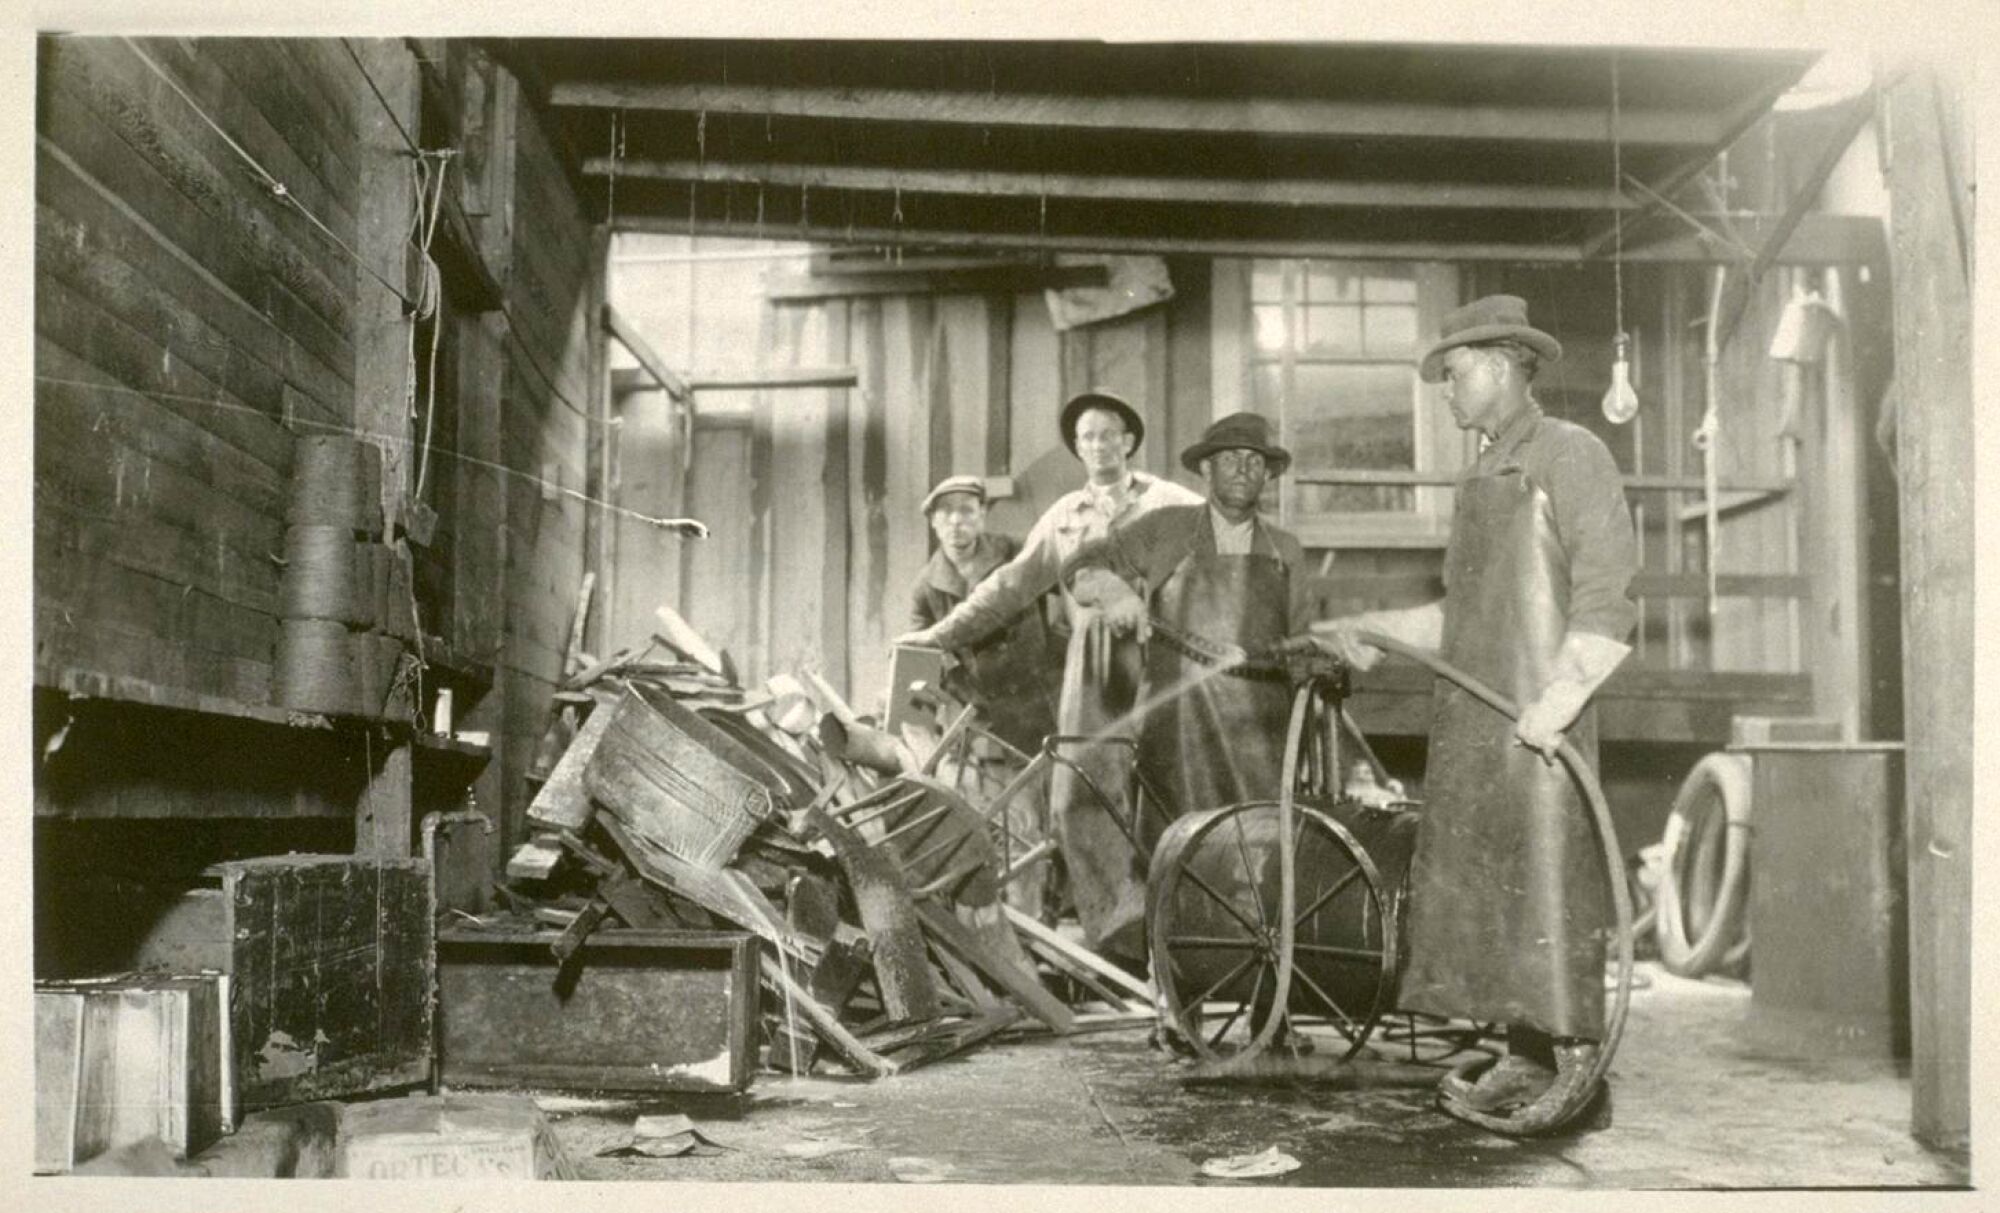 A 1924 archival image shows disinfecting crew in Los Angeles that was the site of a pneumonic plague outbreak.